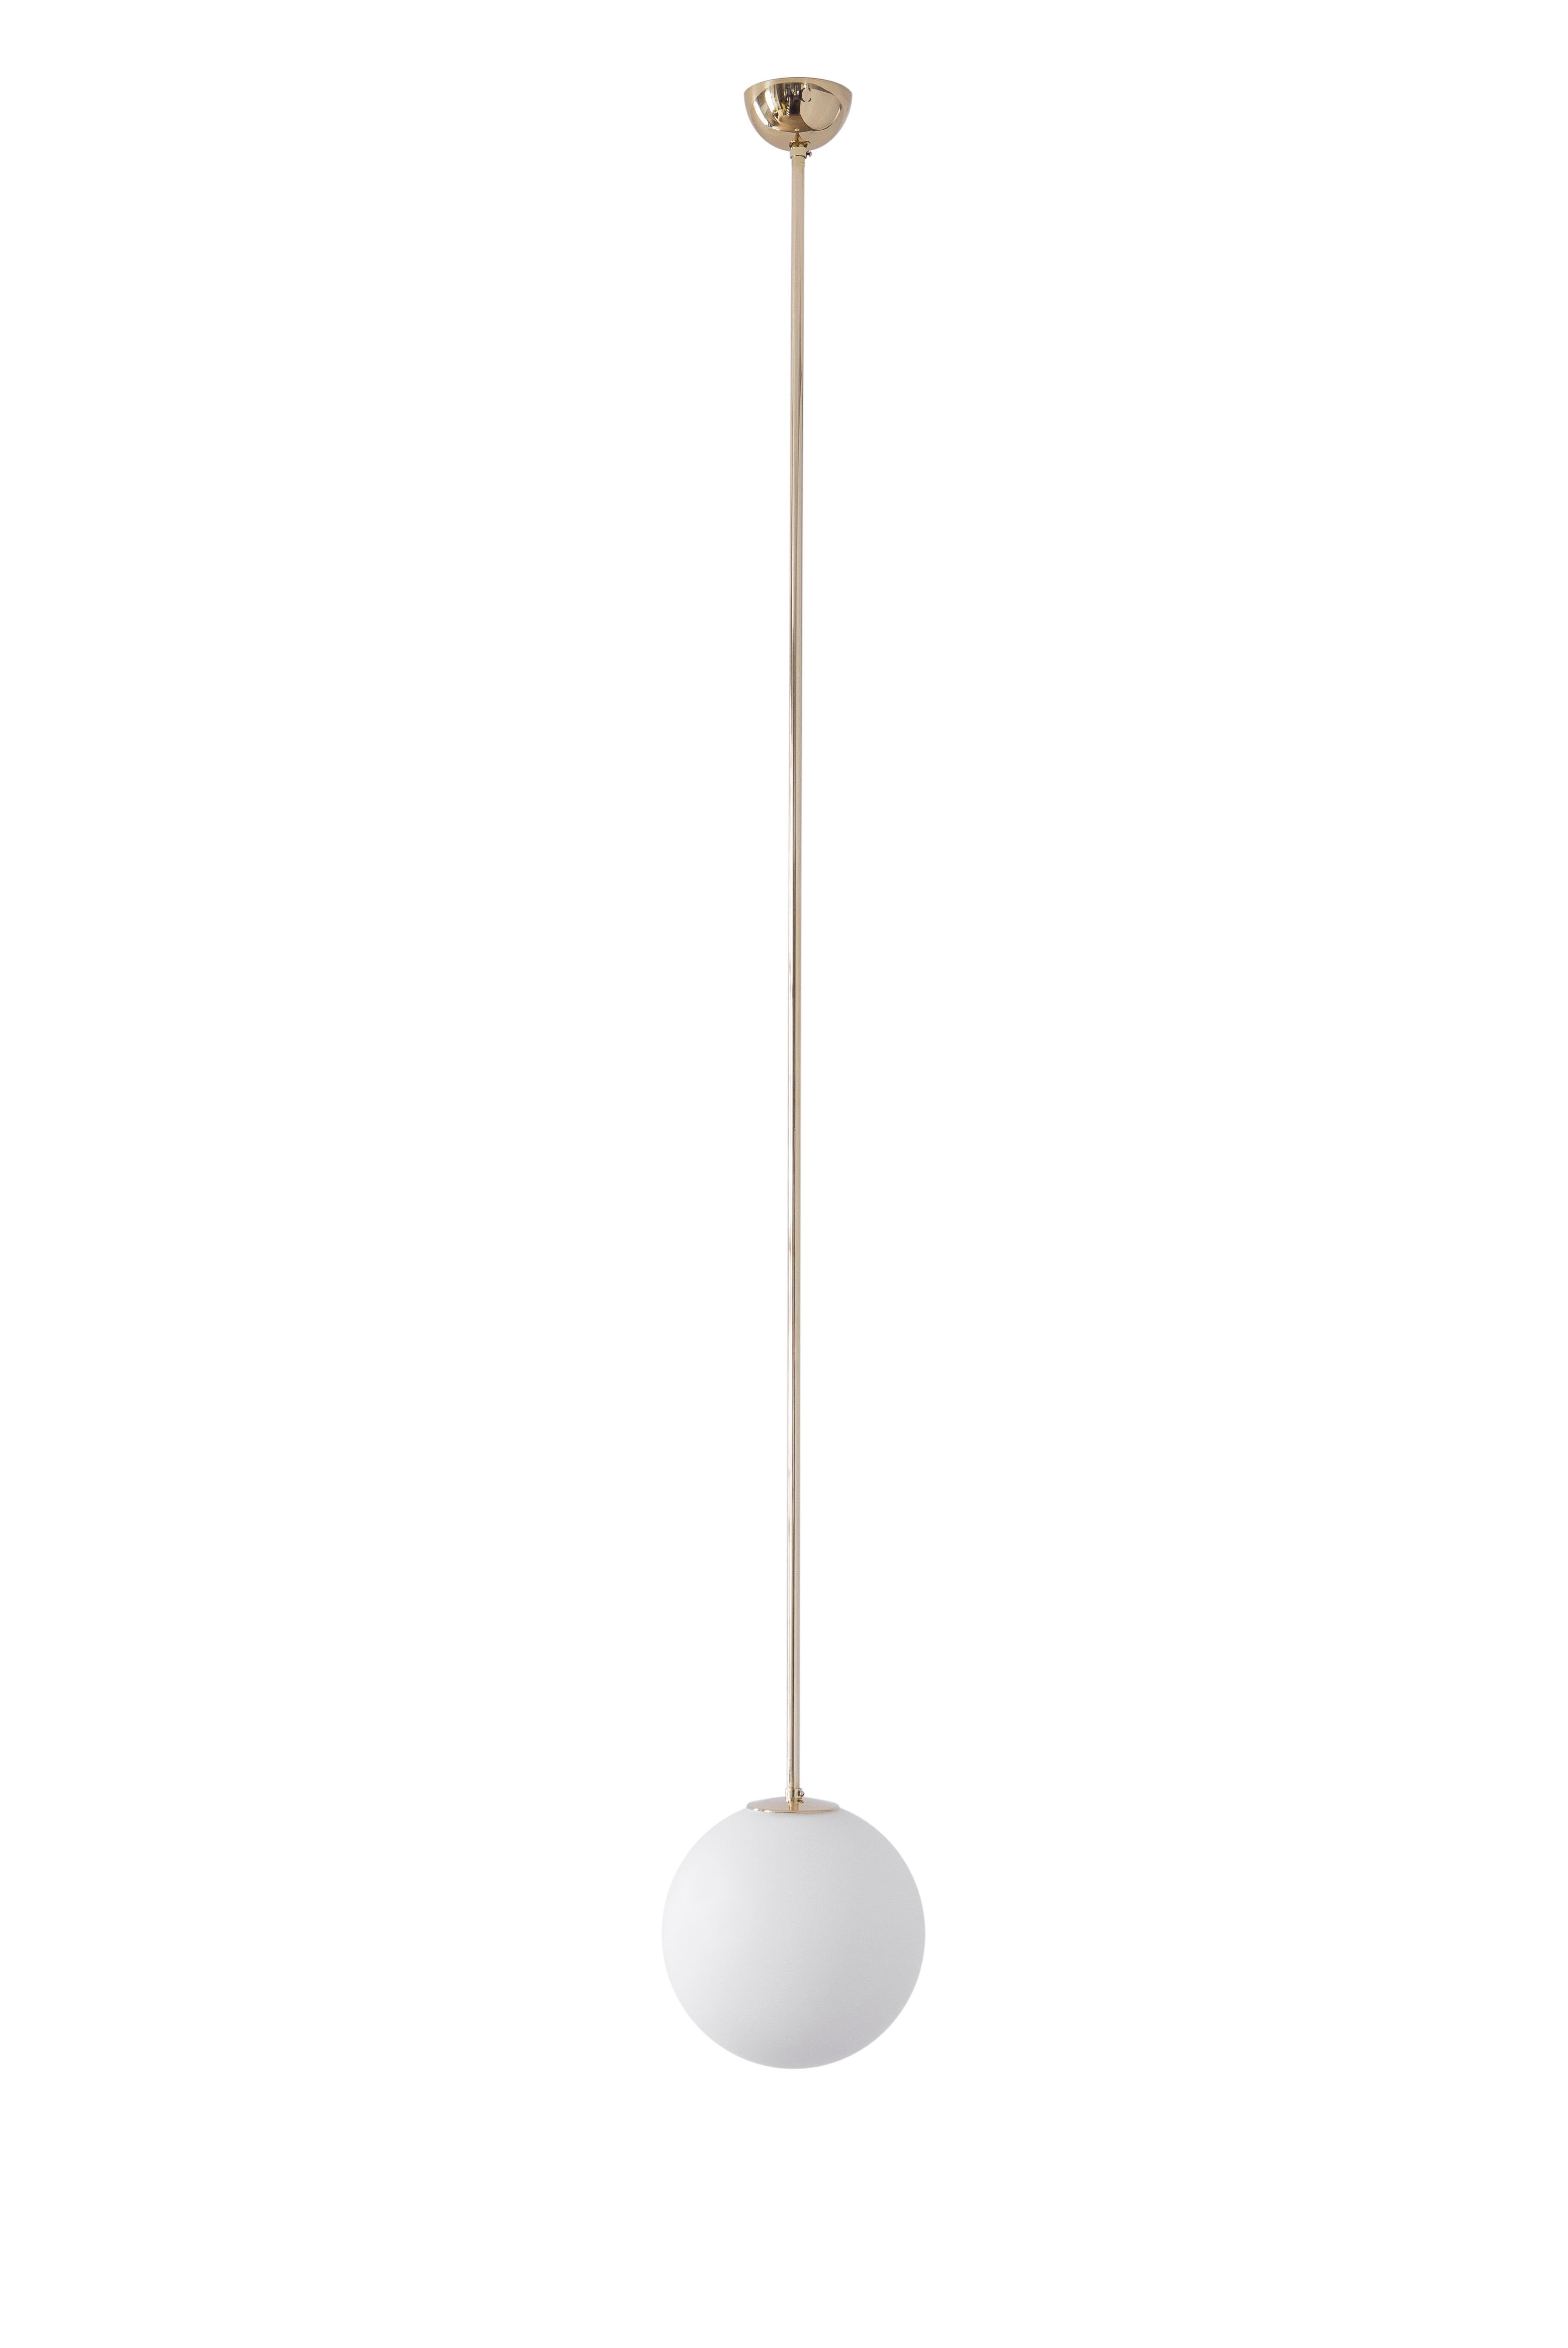 Pendant 06 by Magic Circus Editions
Dimensions: D 25 x W 25 x H 190 cm, also available in H 110, 130, 150, 175 cm
Materials: Brass, mouth blown glass

All our lamps can be wired according to each country. If sold to the USA it will be wired for